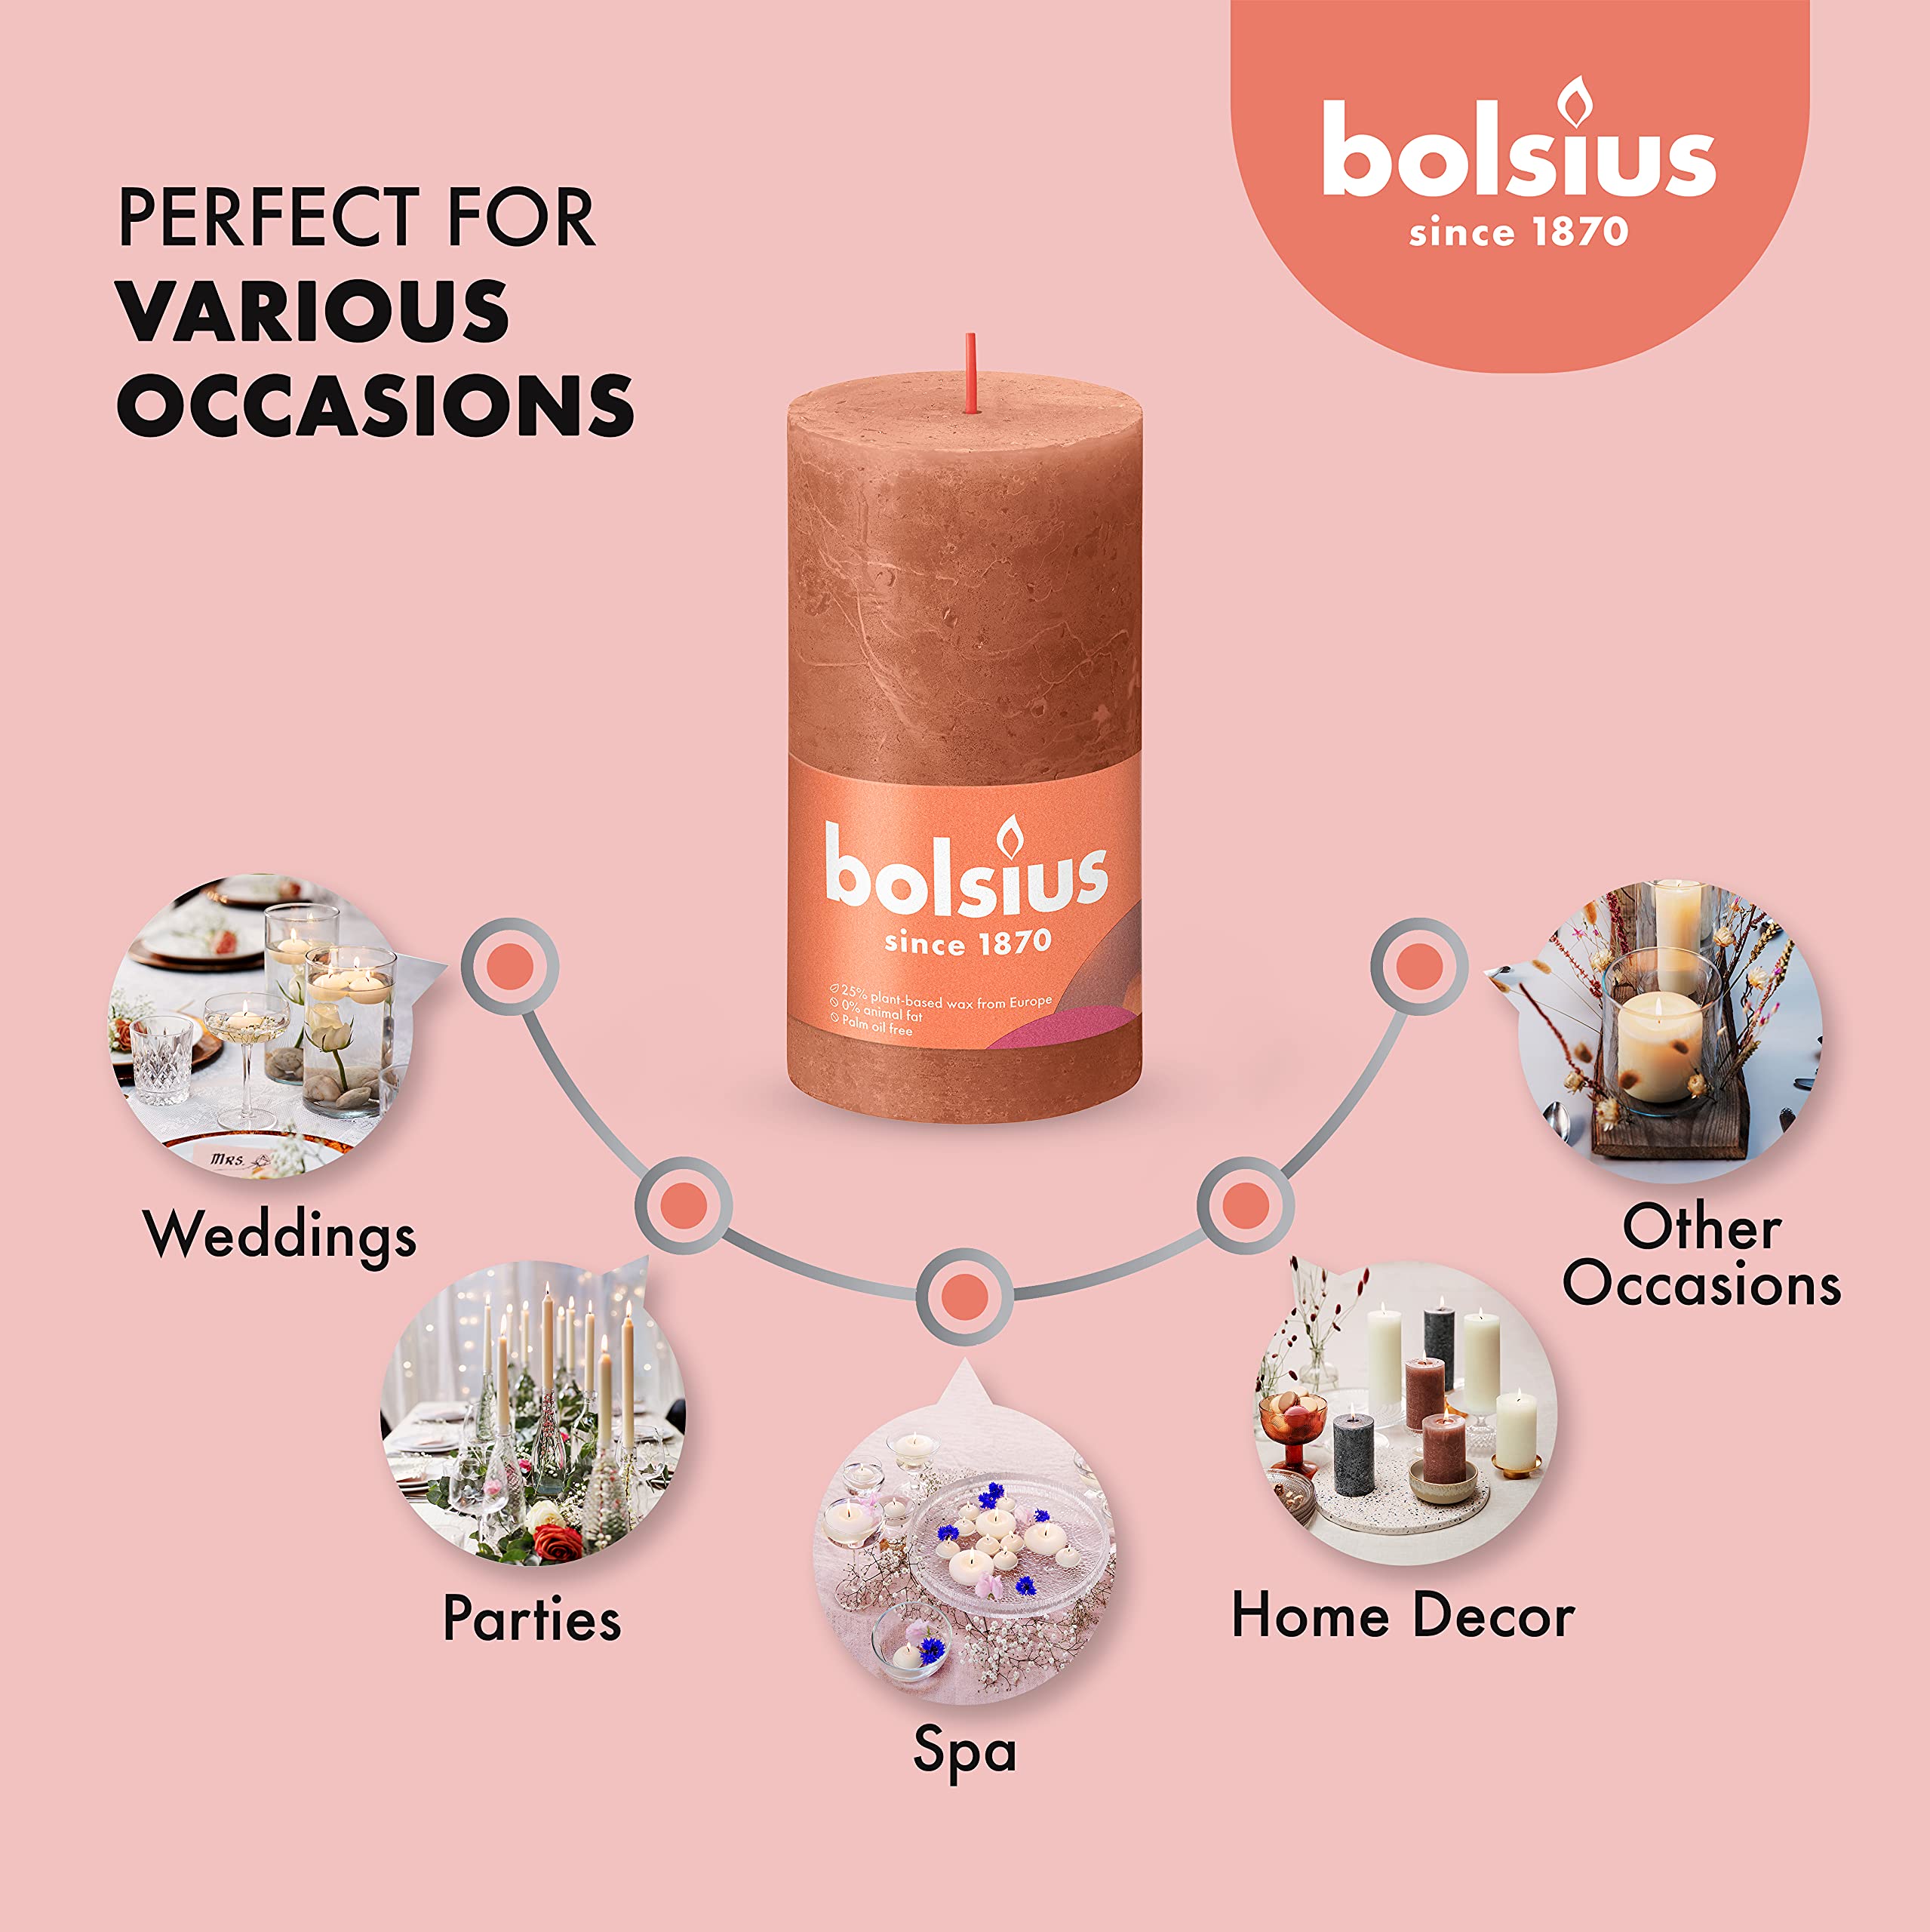 BOLSIUS 4 Pack Rusty Pink Rustic Pillar Candles - 2 X 4 Inches - Premium European Quality - Includes Natural Plant-Based Wax - Unscented Dripless Smokeless 30 Hour Party D�cor and Wedding Candles  - Good